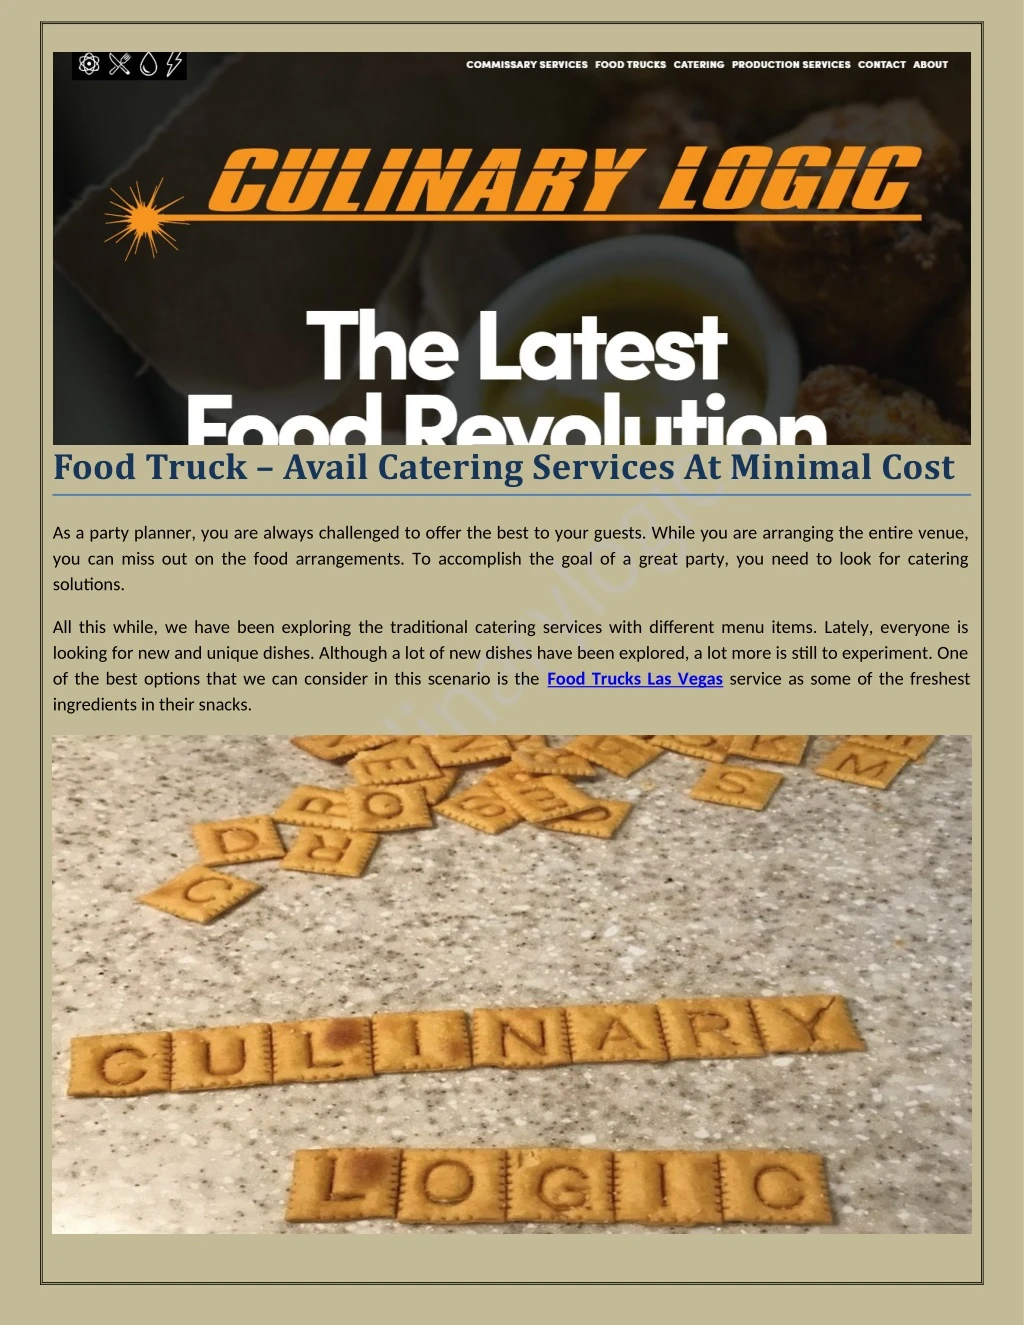 food truck avail catering services at minimal cost